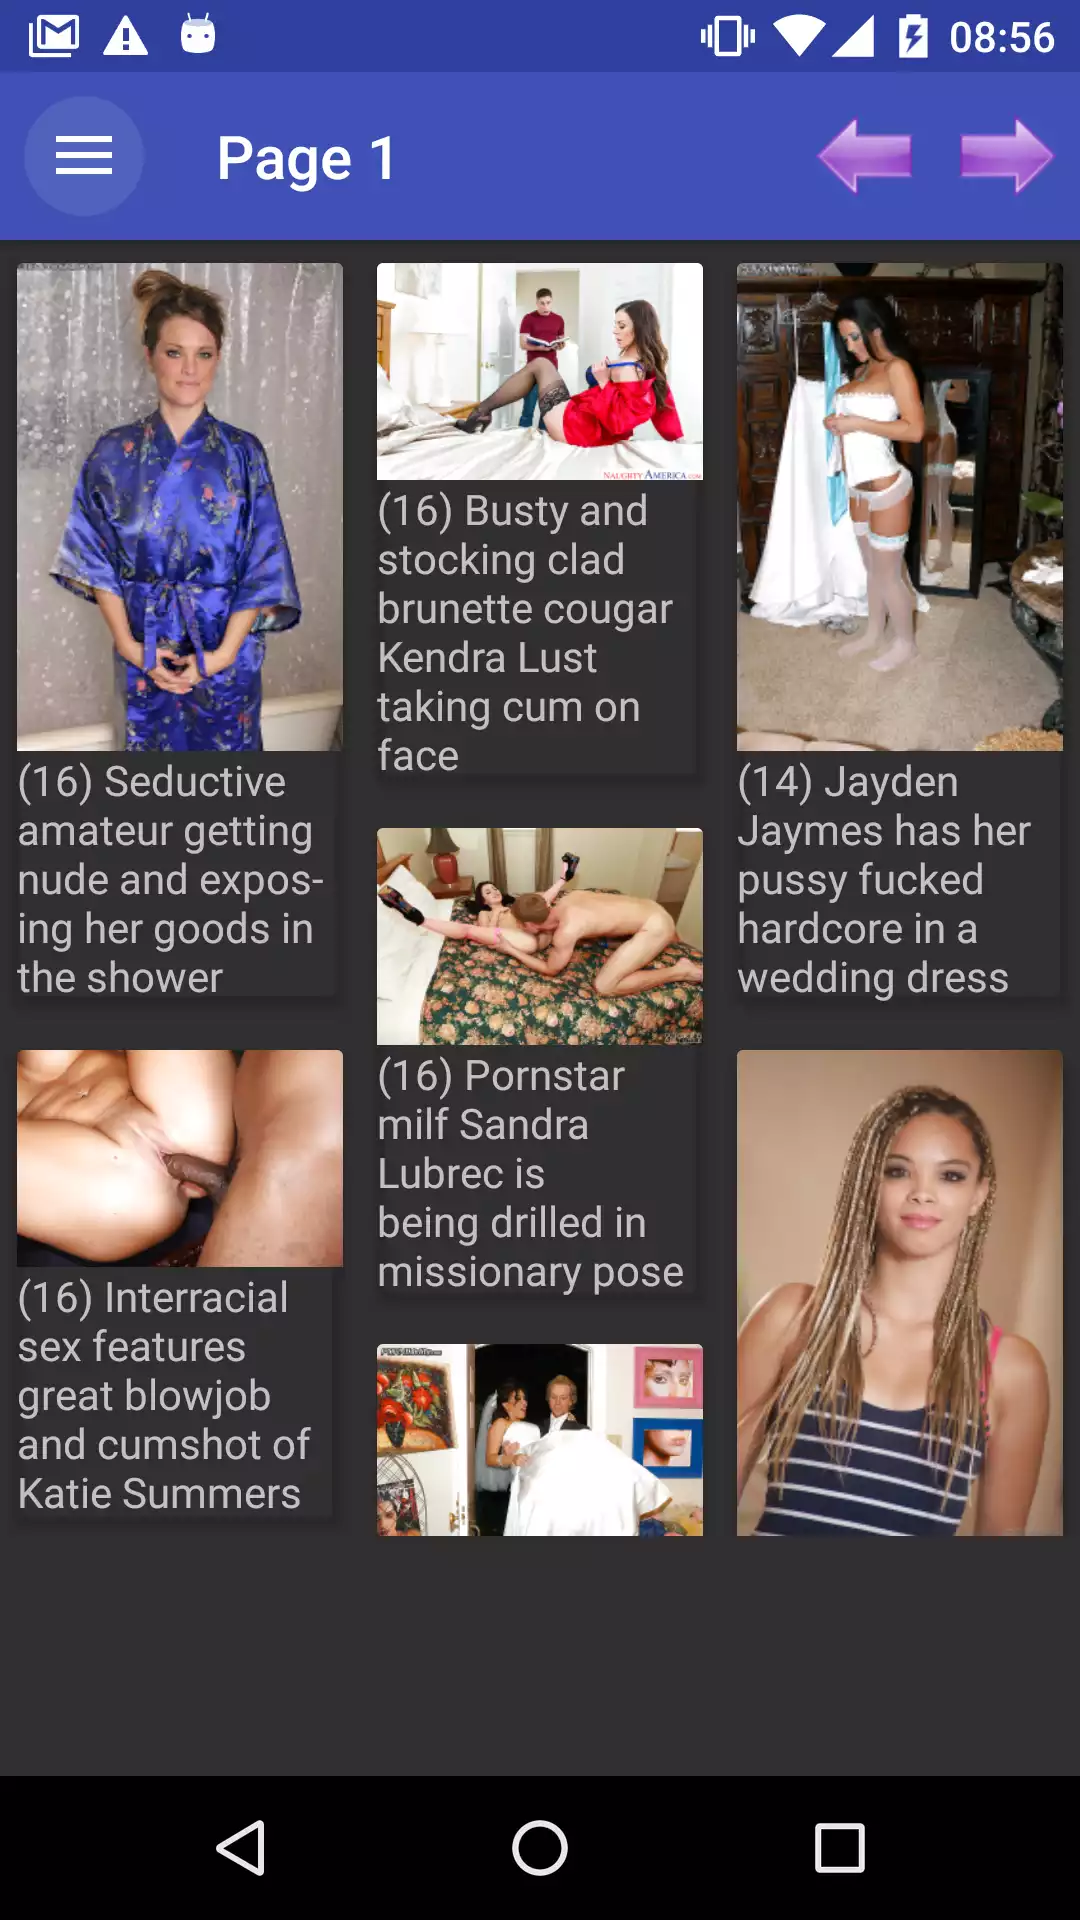 Piercing Galleries app,sexy,mythras,pic,android,hentia,apps,top,latest,adult,hot,phone,porn,that,lair,have,photos,pics,new,hentai,galleries